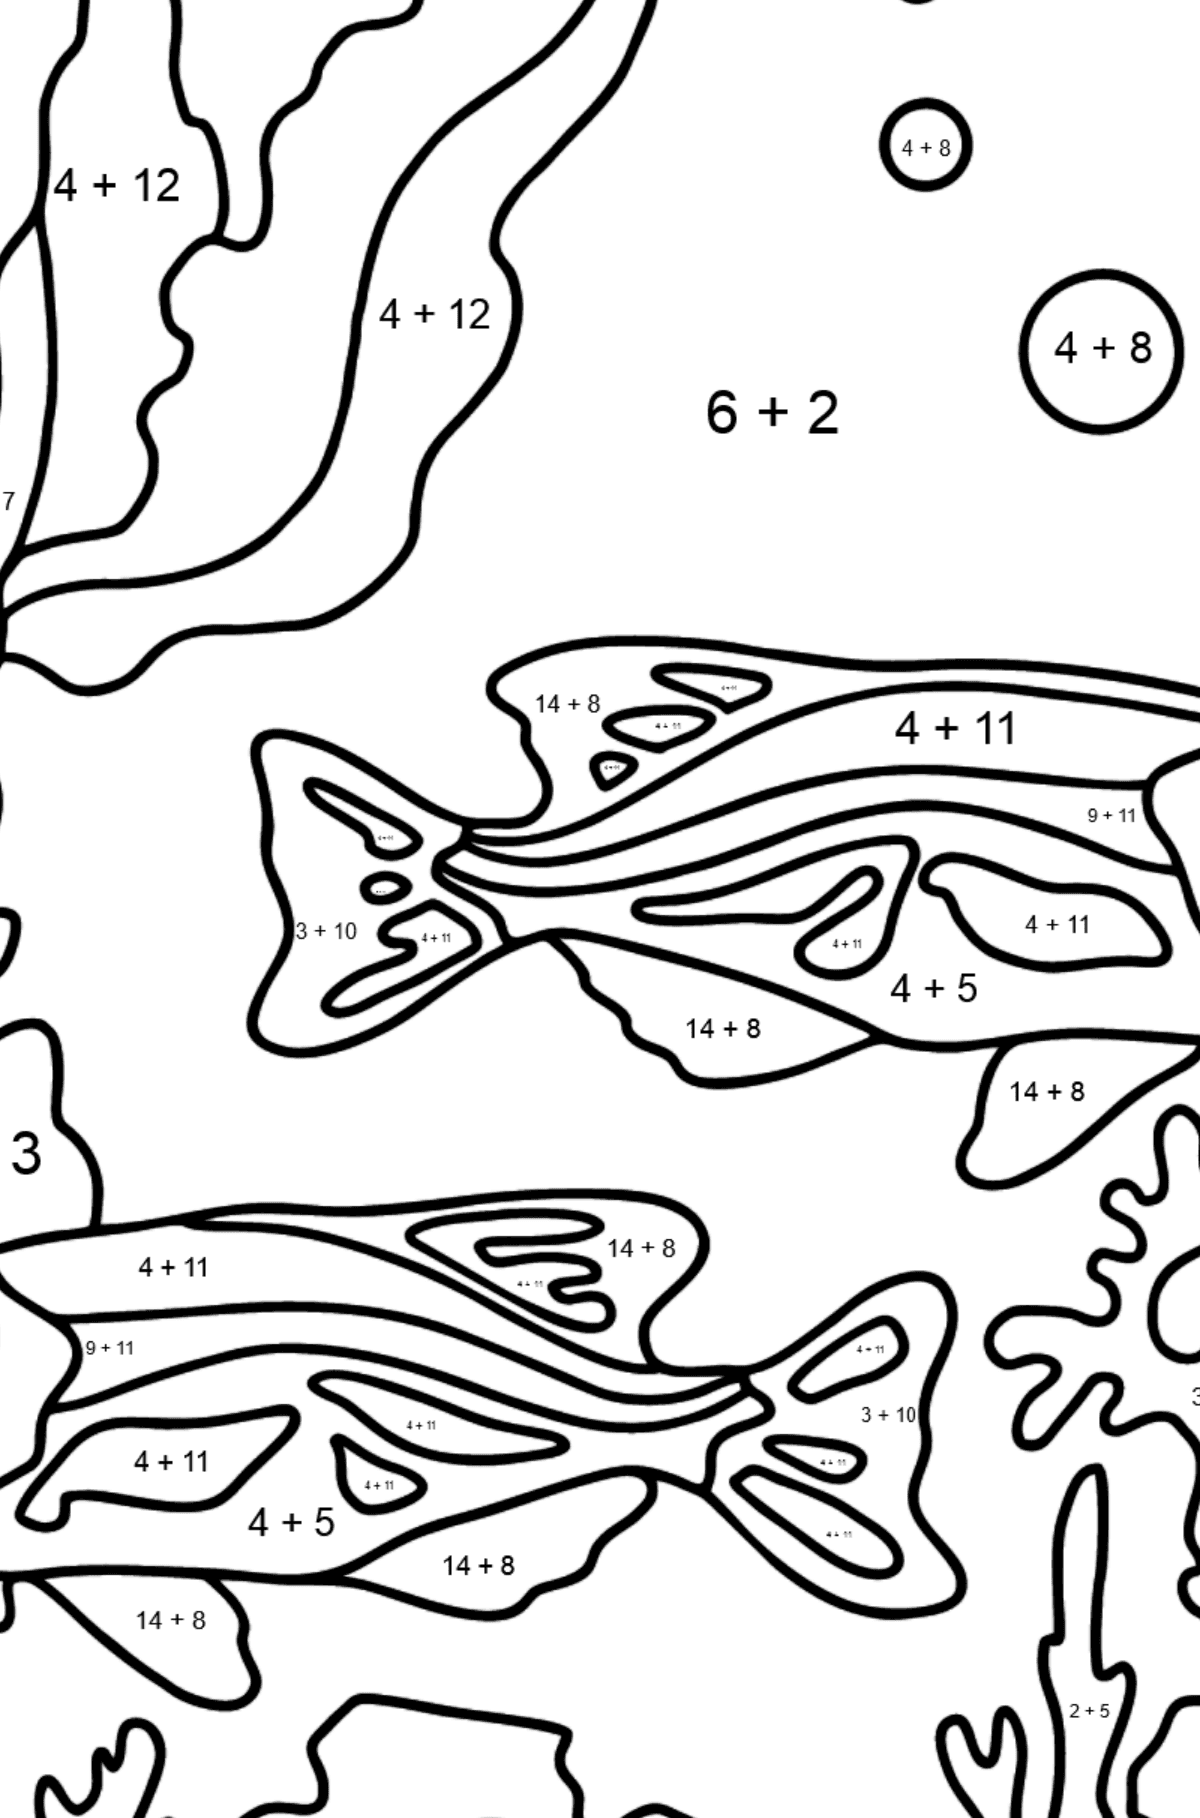 Two Fish Coloring Page - Fish are Swimming Beautifully - Math Coloring - Addition for Kids